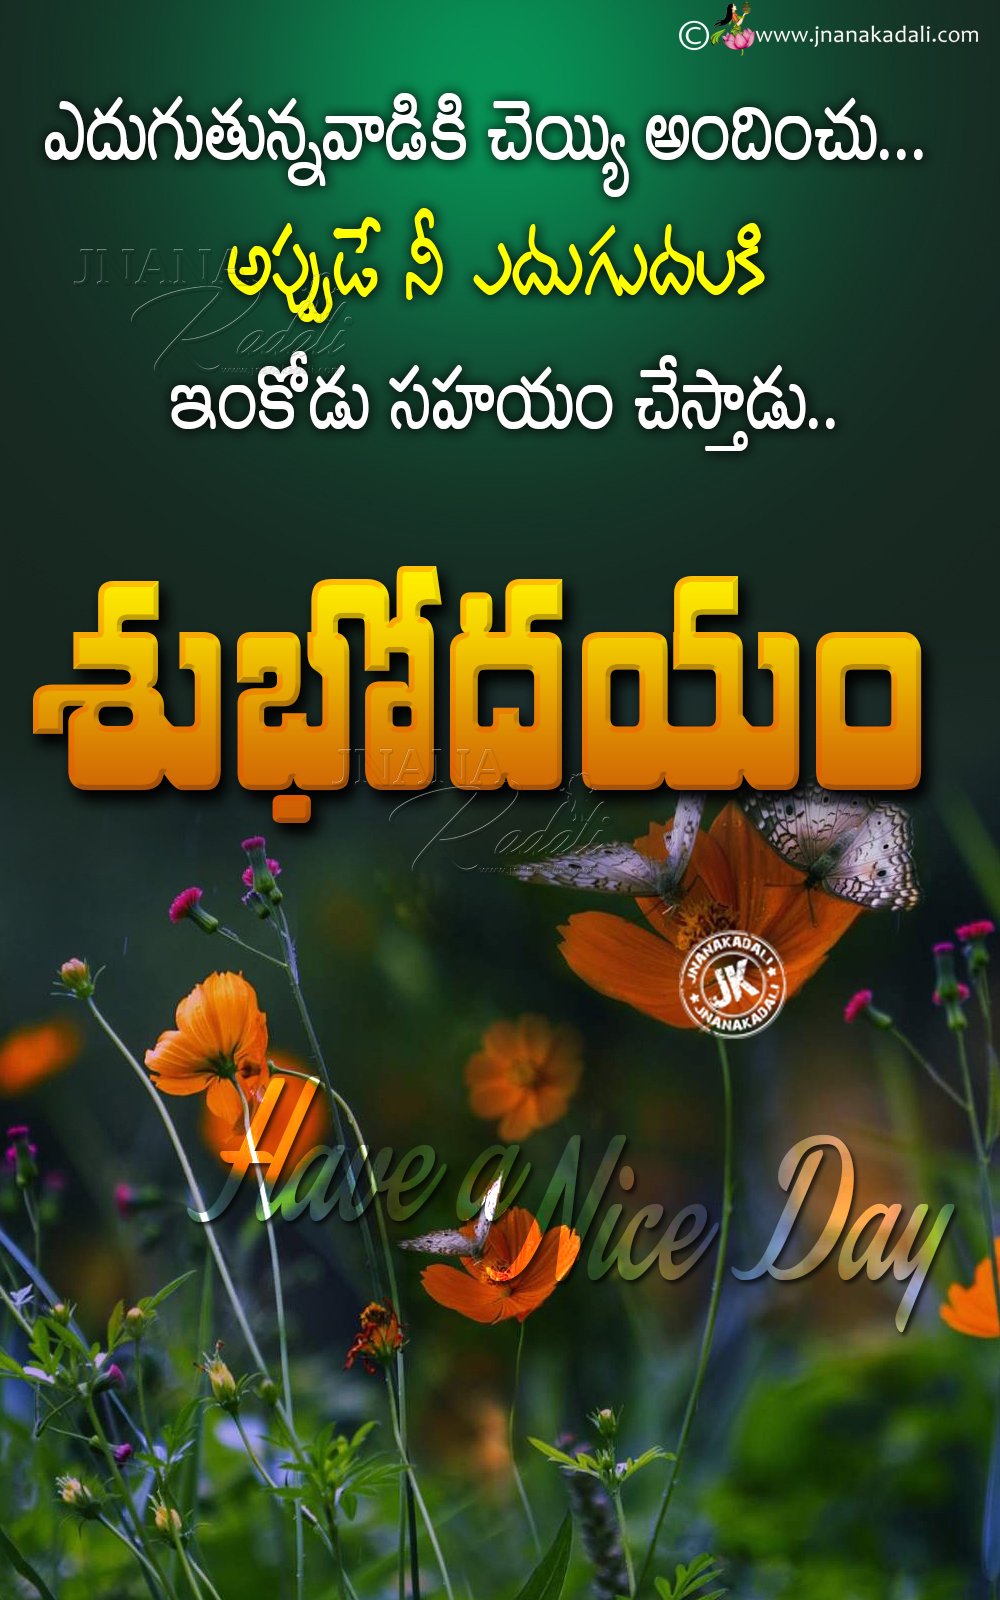 Good Morning have a nice day in Telugu